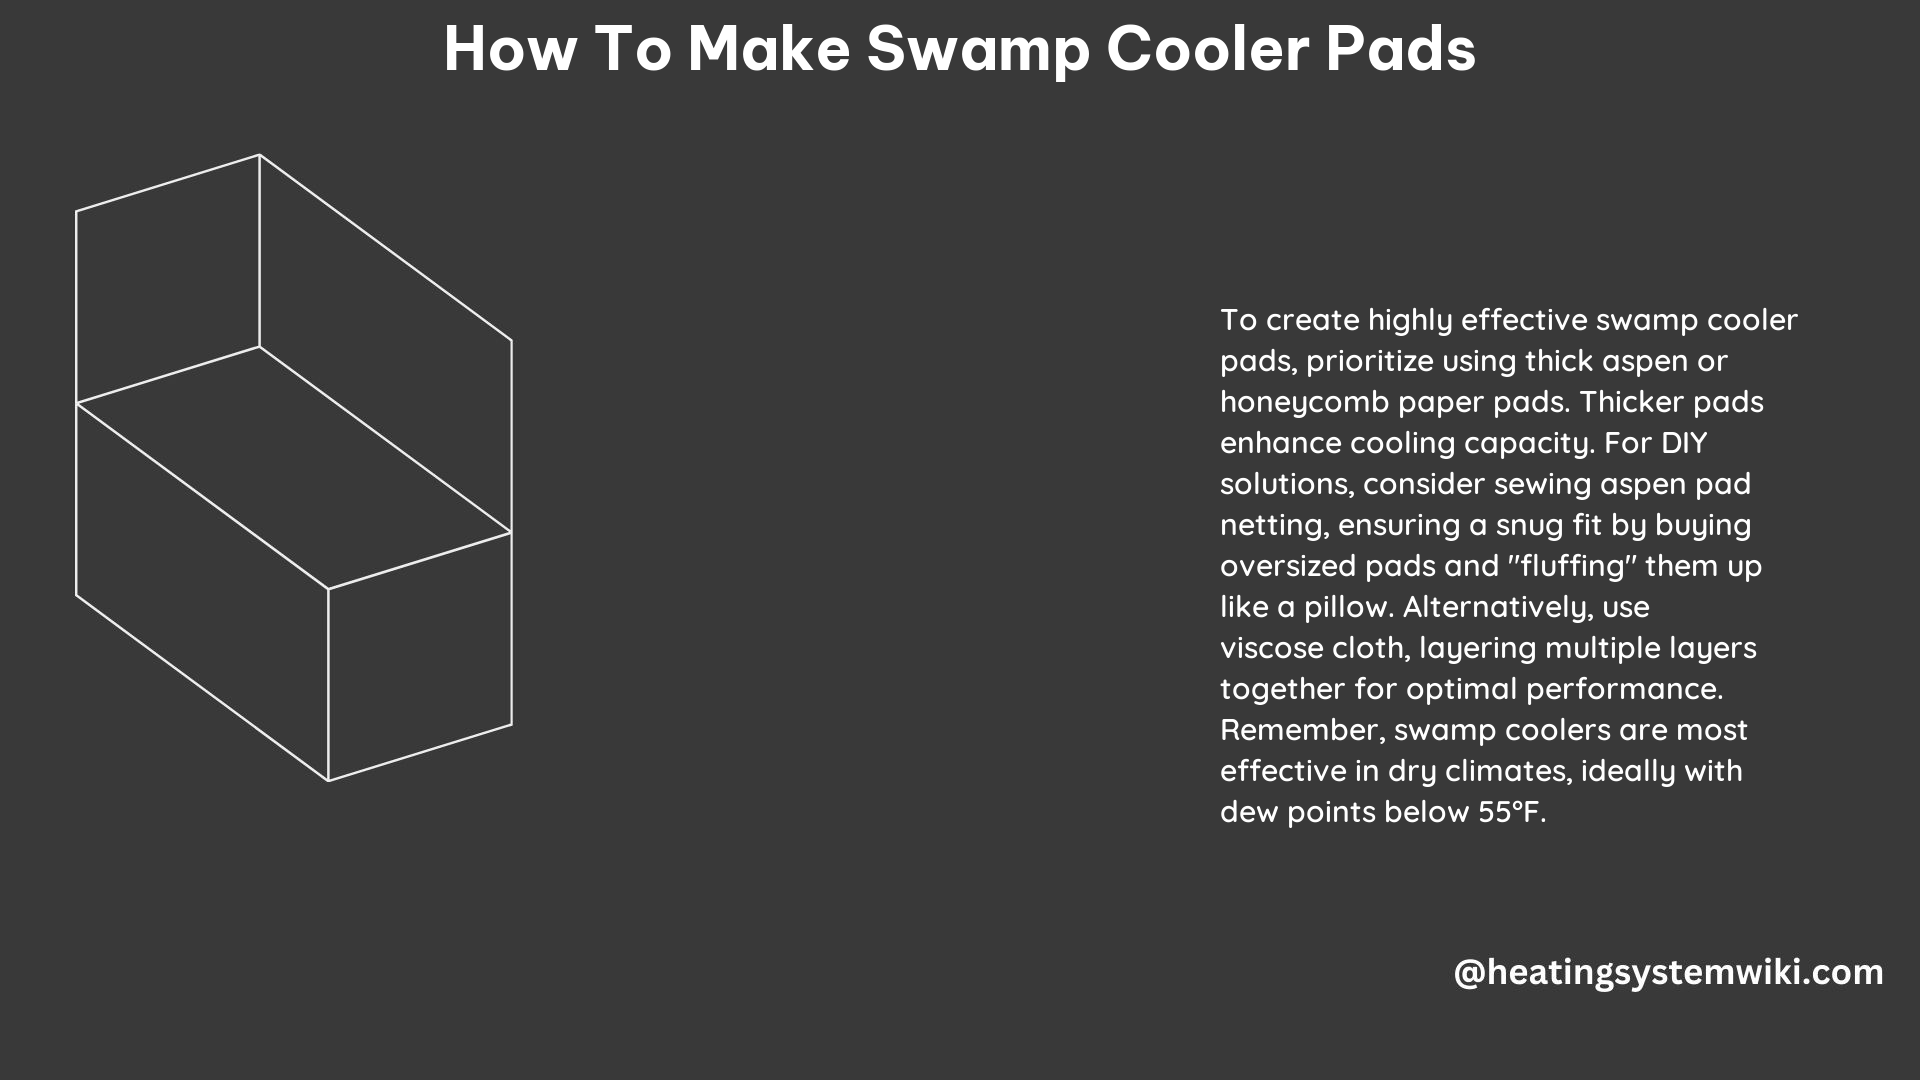 How to Make Swamp Cooler Pads